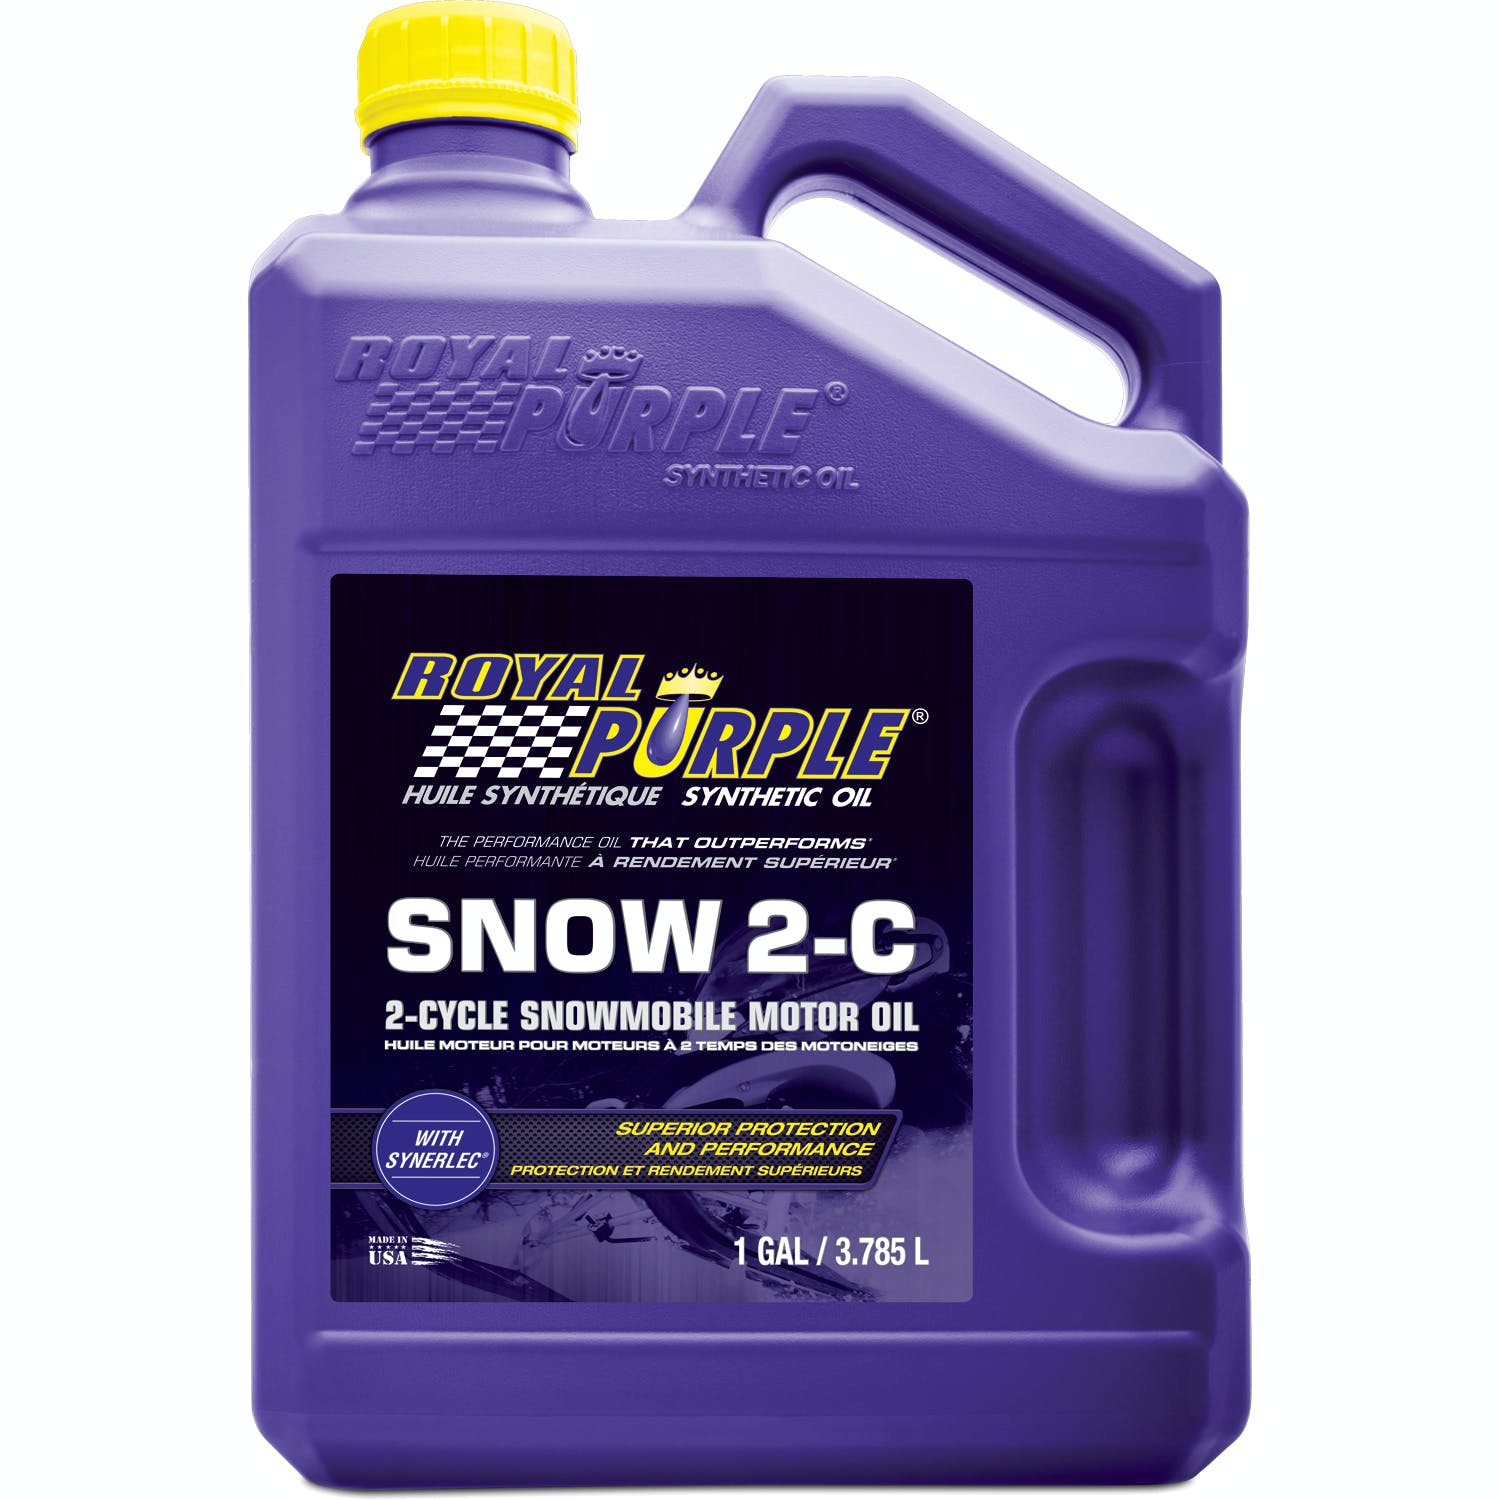 Royal Purple 43511 Snow 2-C TWIII Two Cycle Engine Oil Gal Bottle